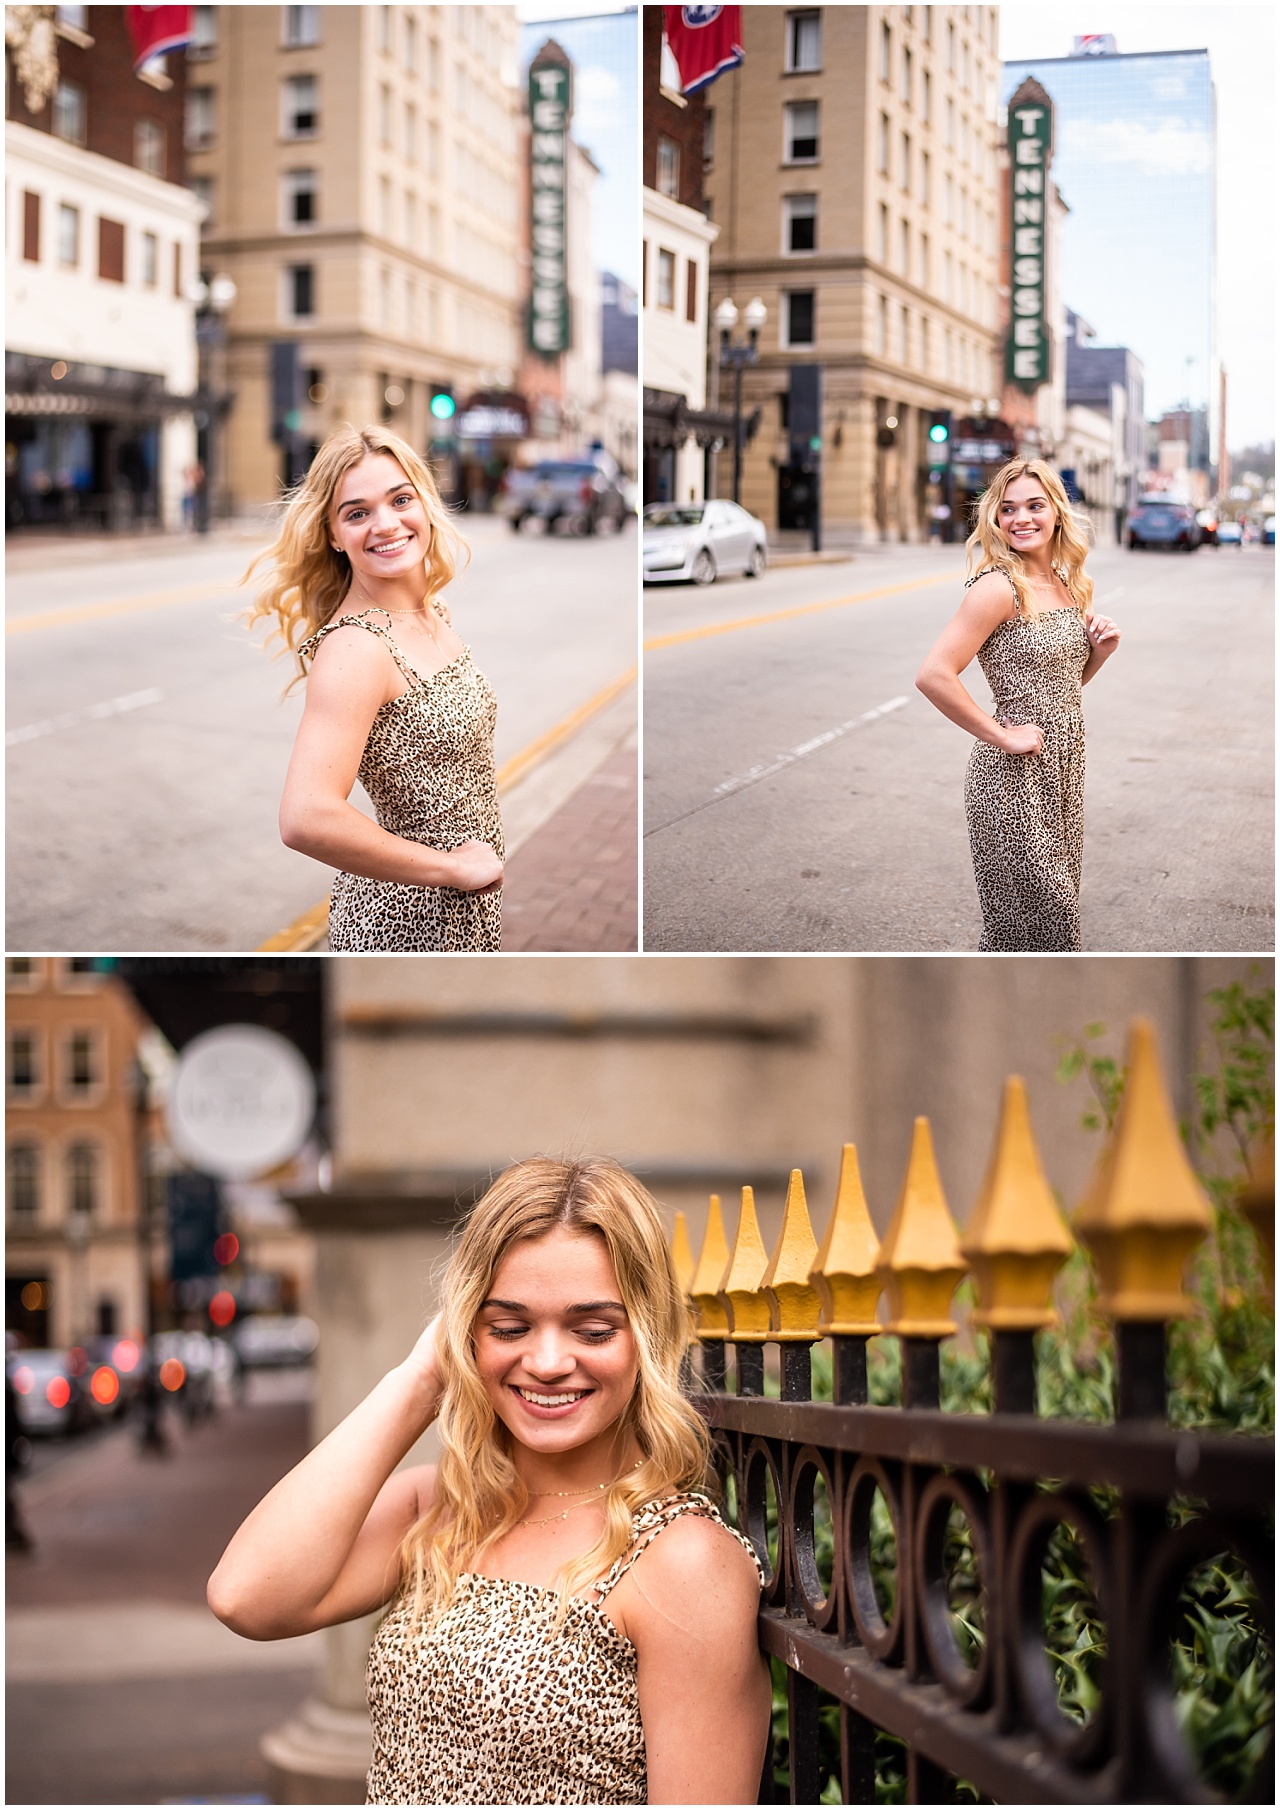 Blonde girl wearing leopard jumpsuit standing in street in downtown Knoxville, Tennessee.